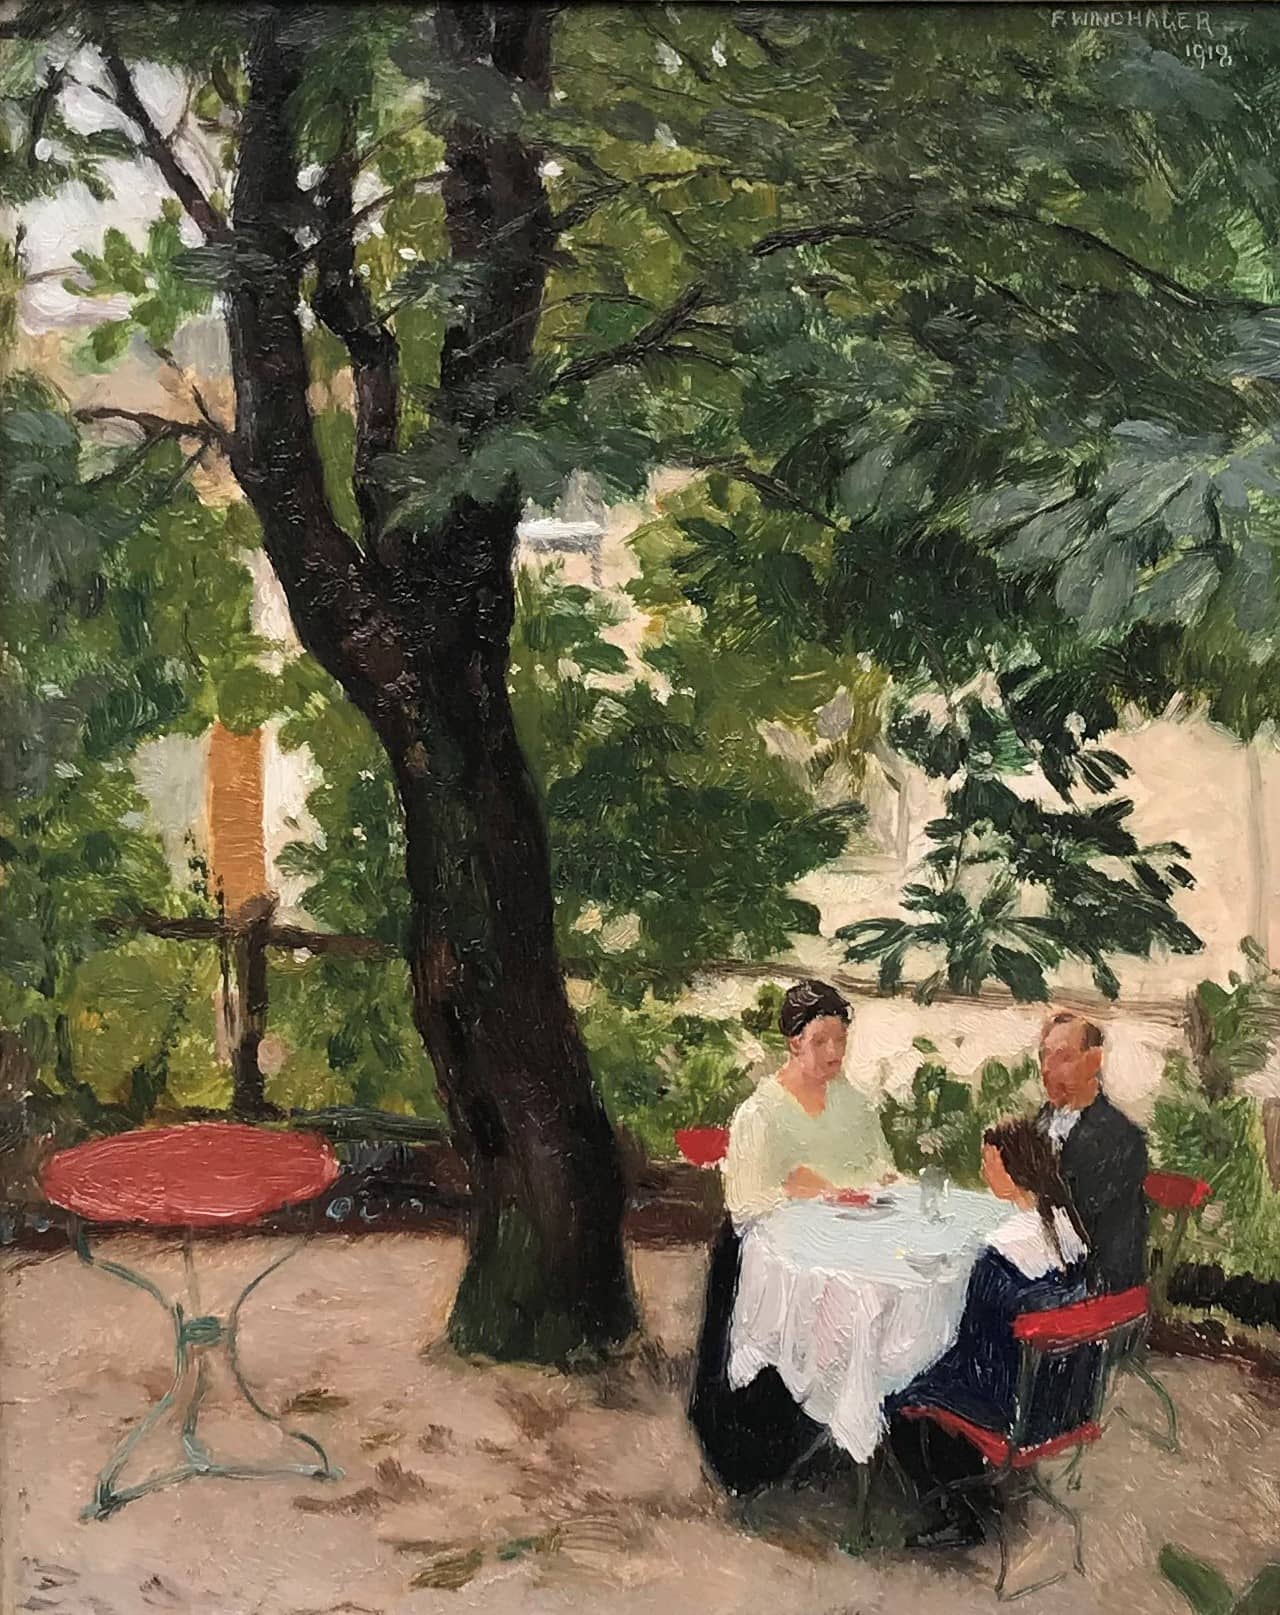 Windhager's Dining on a terrace. Set in an outdoor cafe in Austria, a well-dressed couple and their daughter prepare for lunch. Large tree in the background.